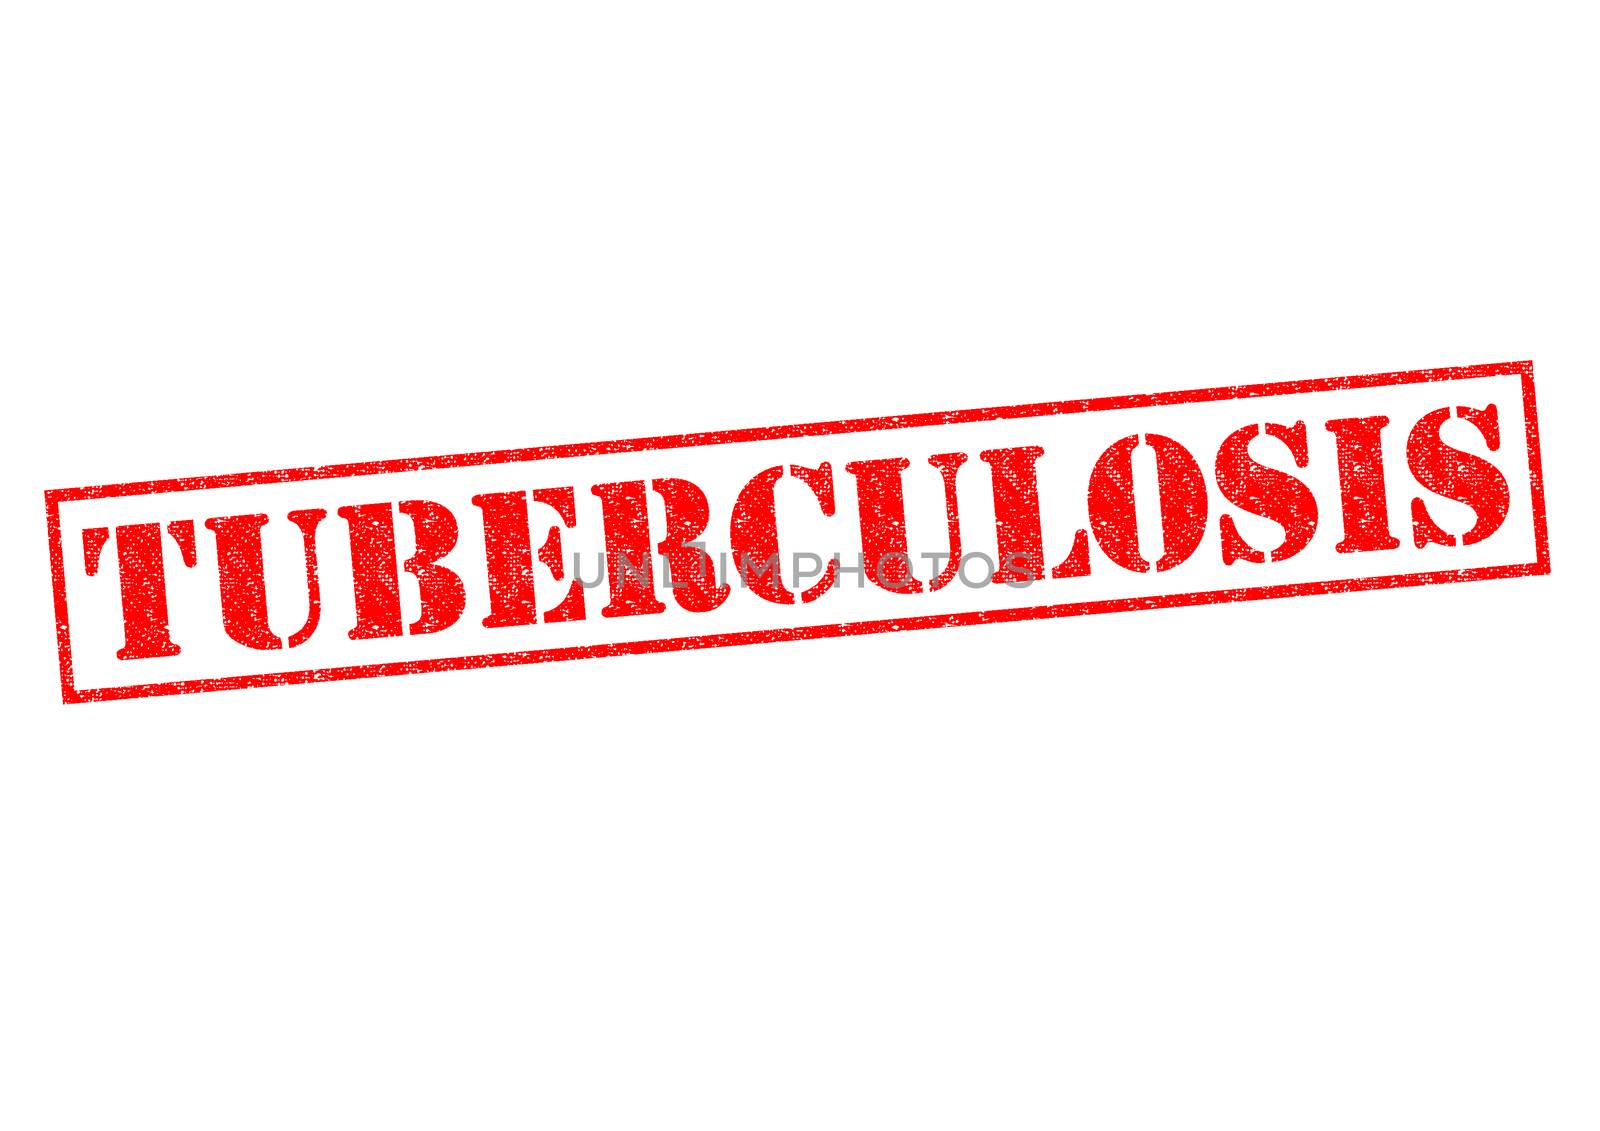 TUBERCULOSIS red Rubber Stamp over a white background.